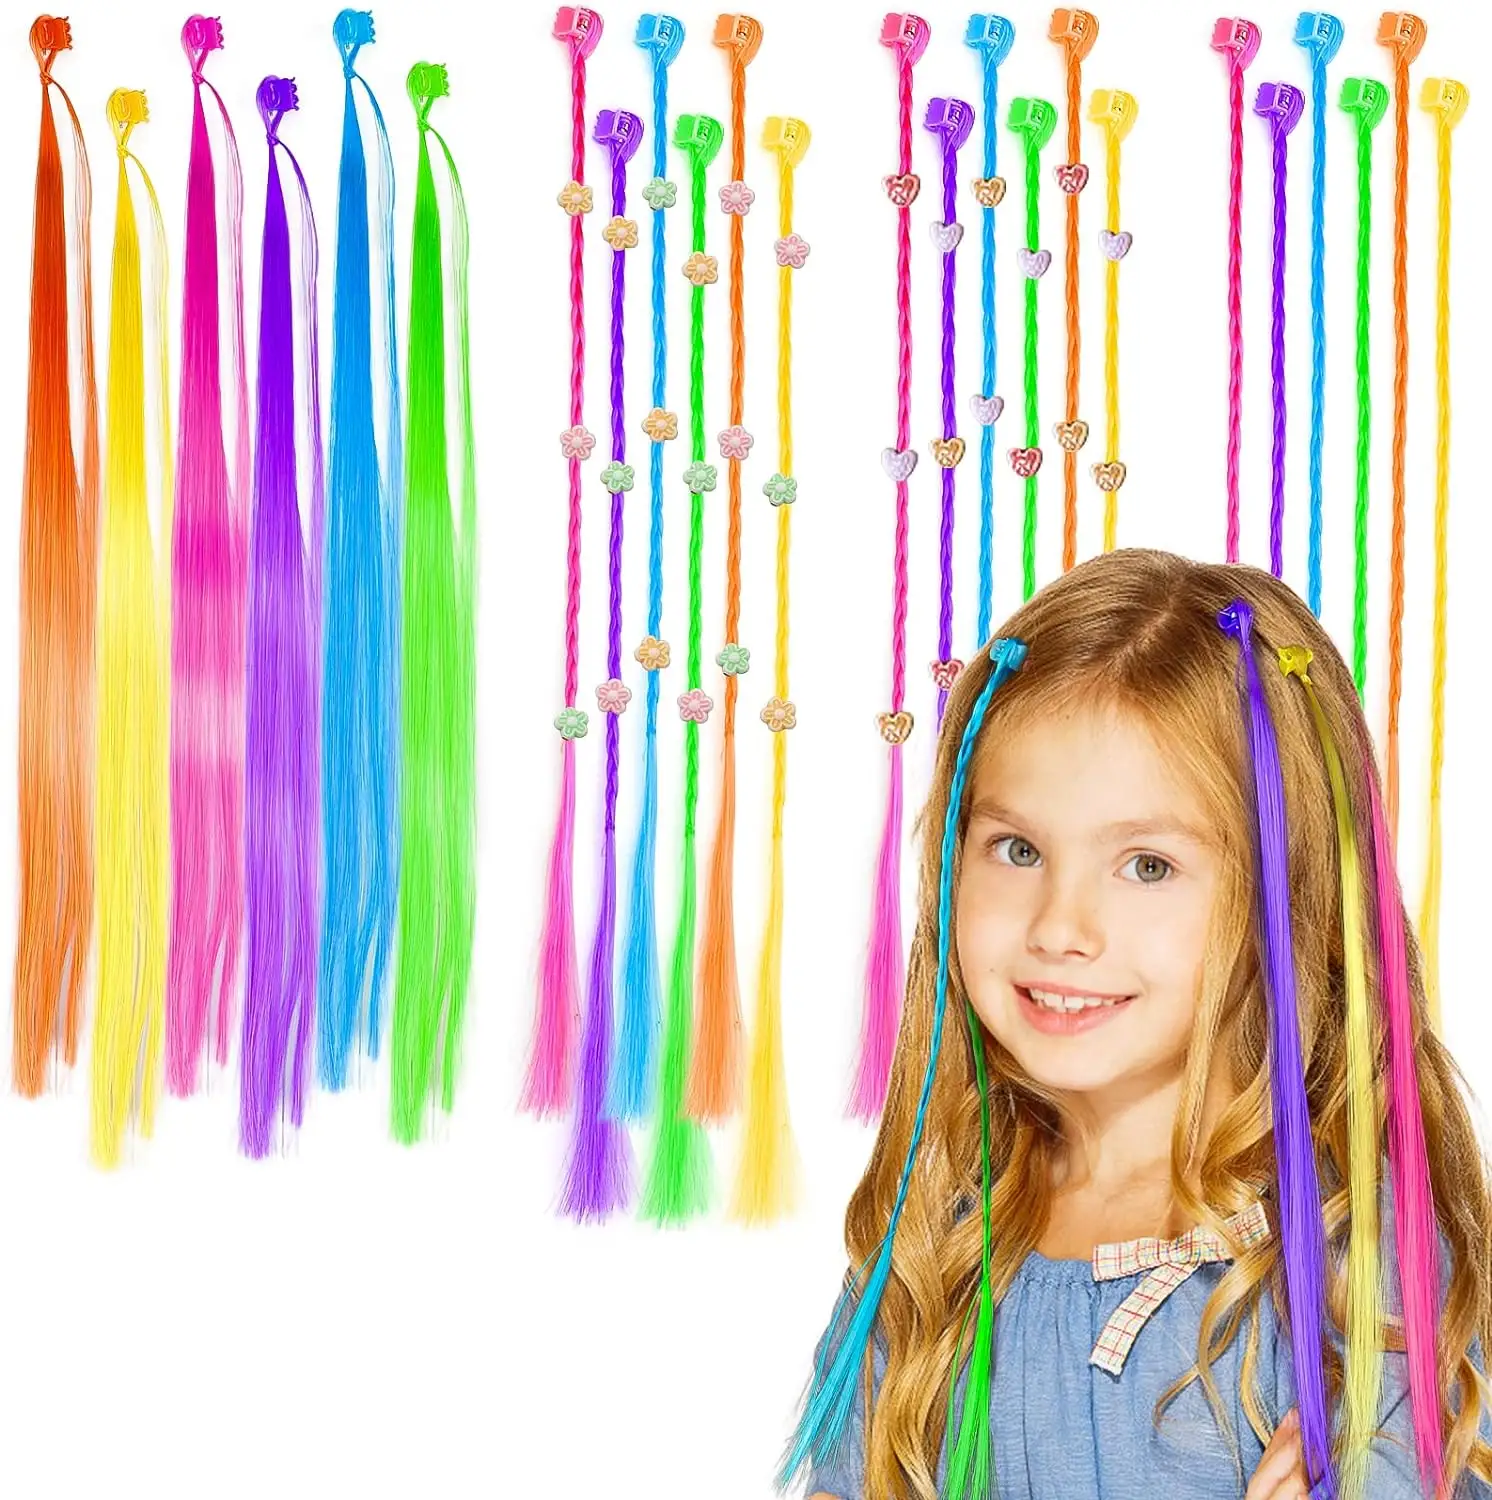 6pcs Girls Cute Colorful Braided Wig Hair Extensions Decorative Hair Clips Hair Accessories For Party Performance